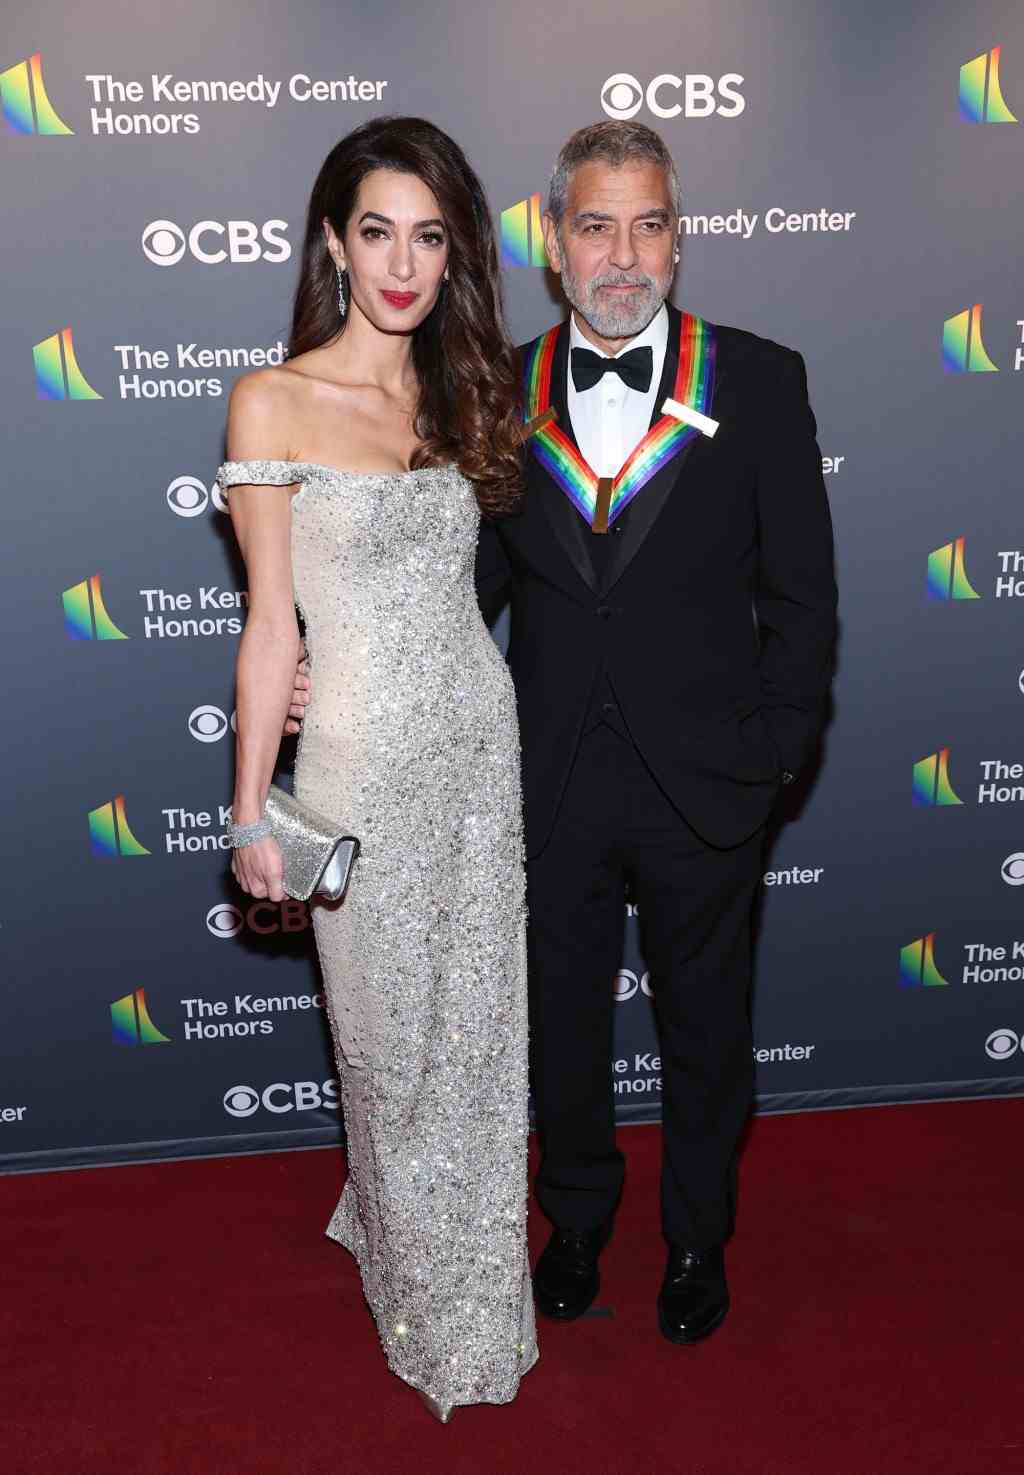 george-amal-clooney-2022-kennedy-center-honors011